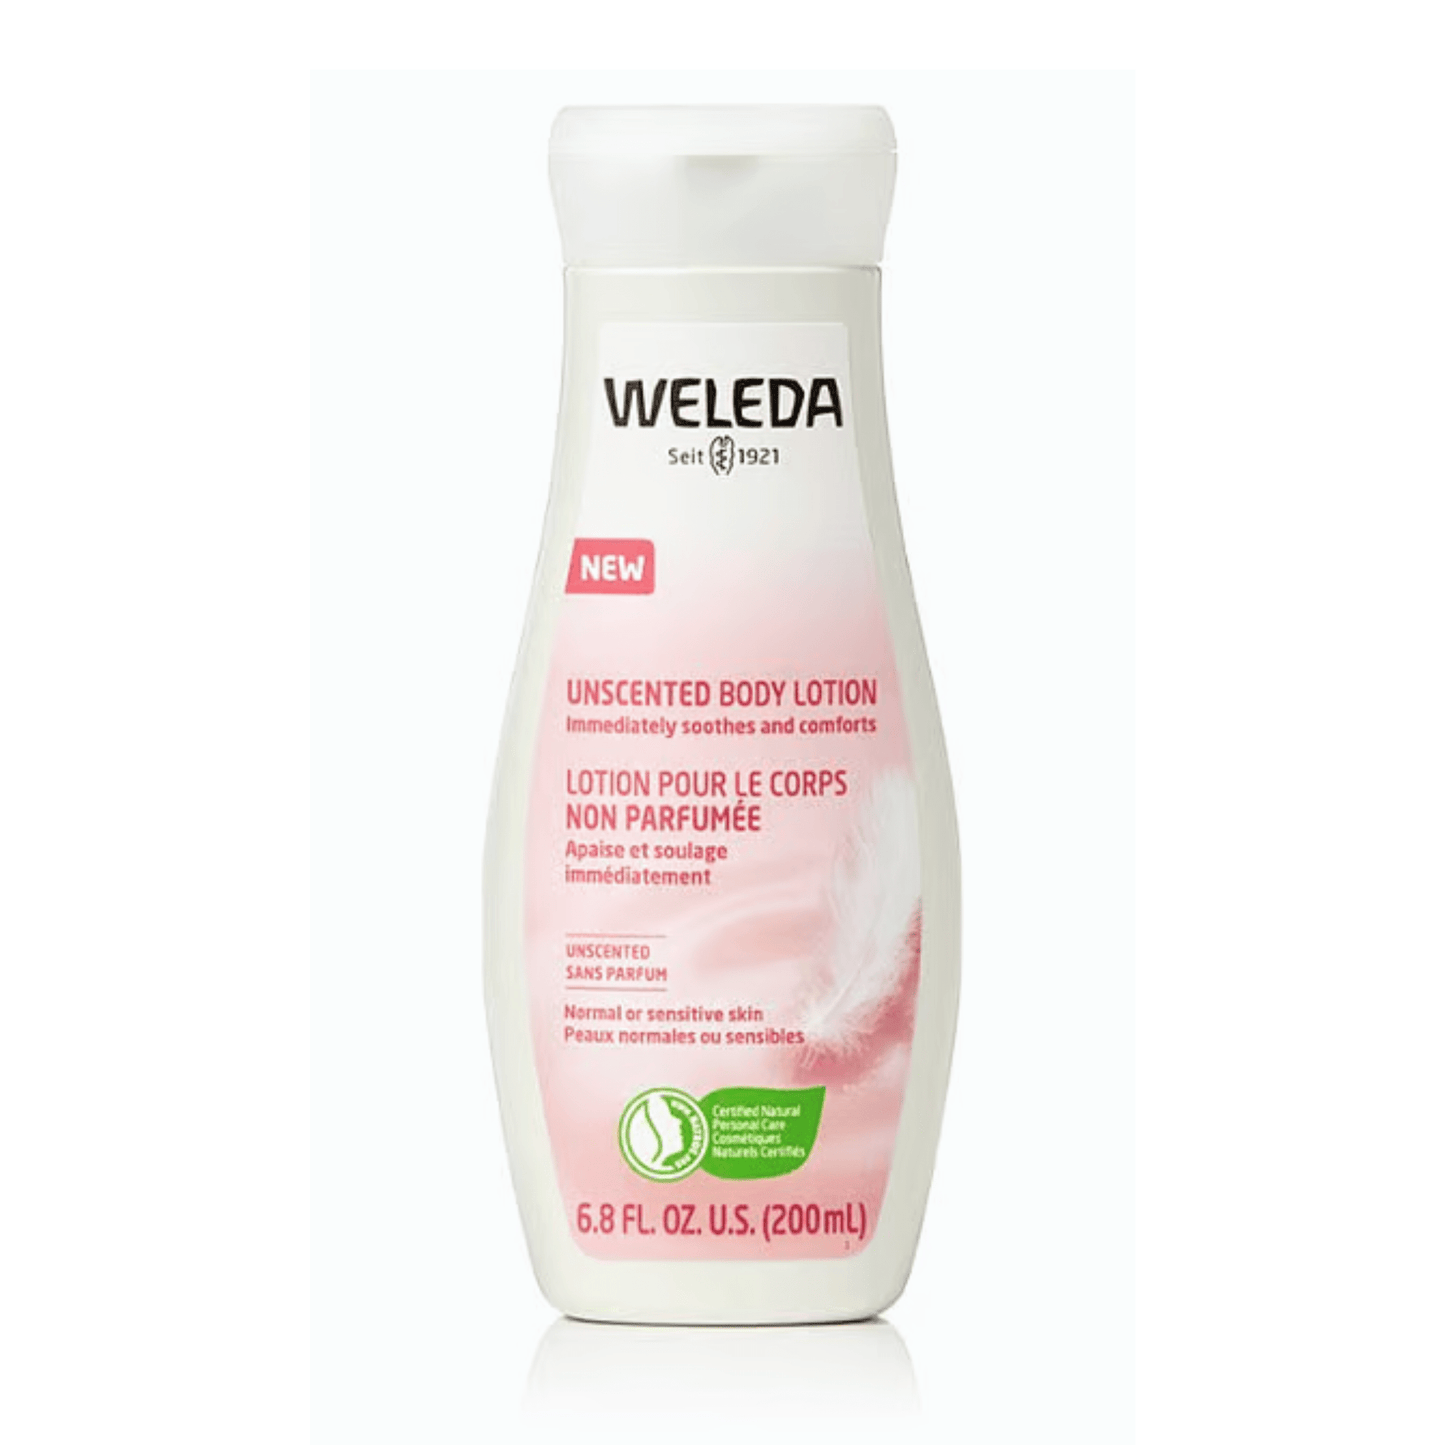 Primary Image of Unscented Body Lotion